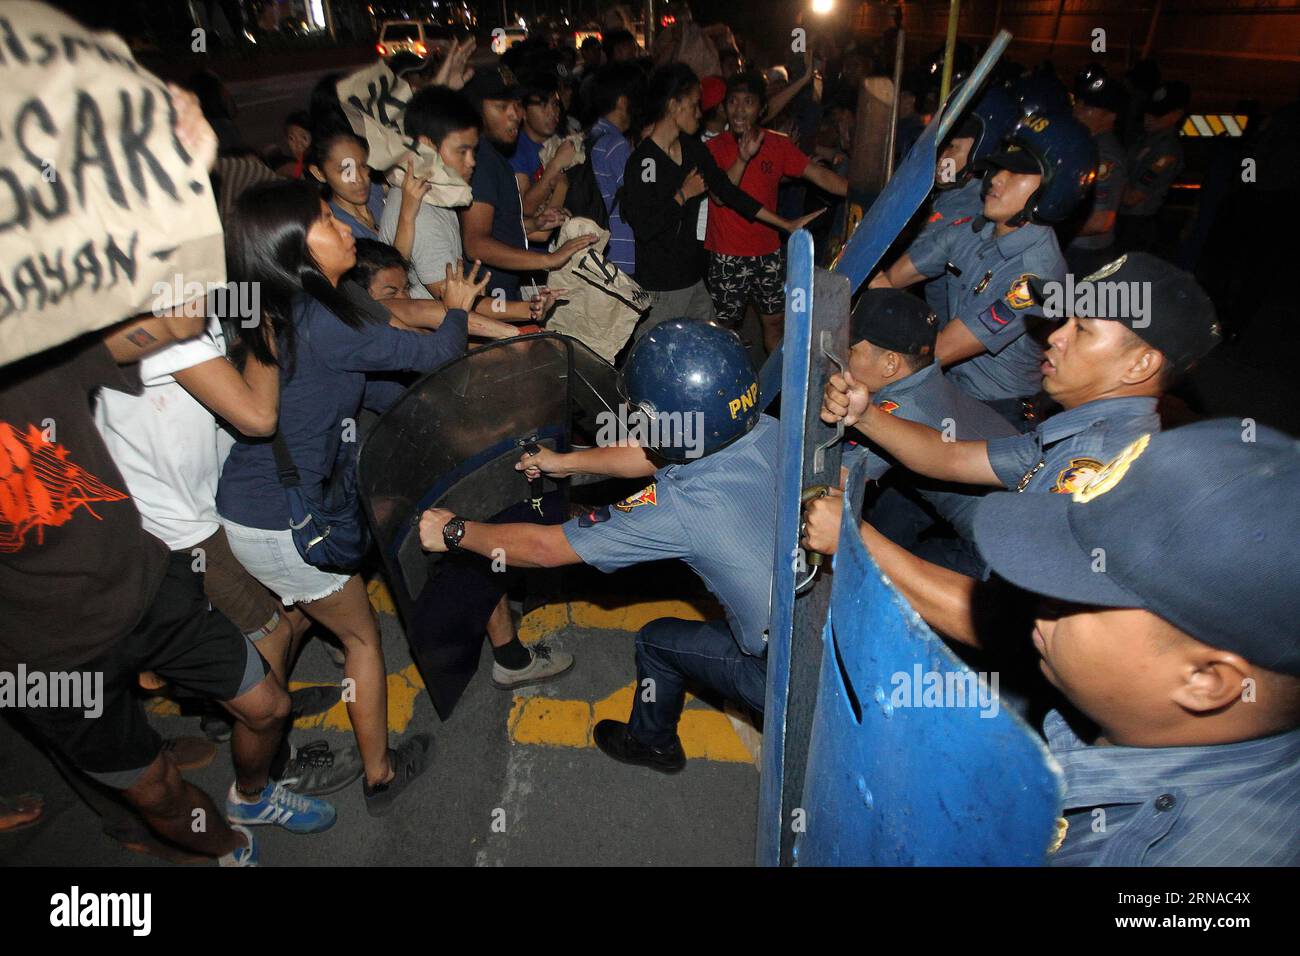 (160120) -- MANILA, Jan. 20, 2016 -- Anti-riot policemen clash with activists during a protest rally against the Enhanced Defense Cooperation Agreement (EDCA) in front of the U.S. Embassy in Manila, the Philippines, Jan. 20, 2016. The protesters denounced the EDCA between the U.S. and the Philippines after the Philippine Supreme Court decided that the Philippines defense cooperation deal with the United States was constitutional and did not need the concurrence of the Senate. ) PHILIPPINES-MANILA-EDCA-PROTEST RouellexUmali PUBLICATIONxNOTxINxCHN   160120 Manila Jan 20 2016 Anti Riot Policemen Stock Photo